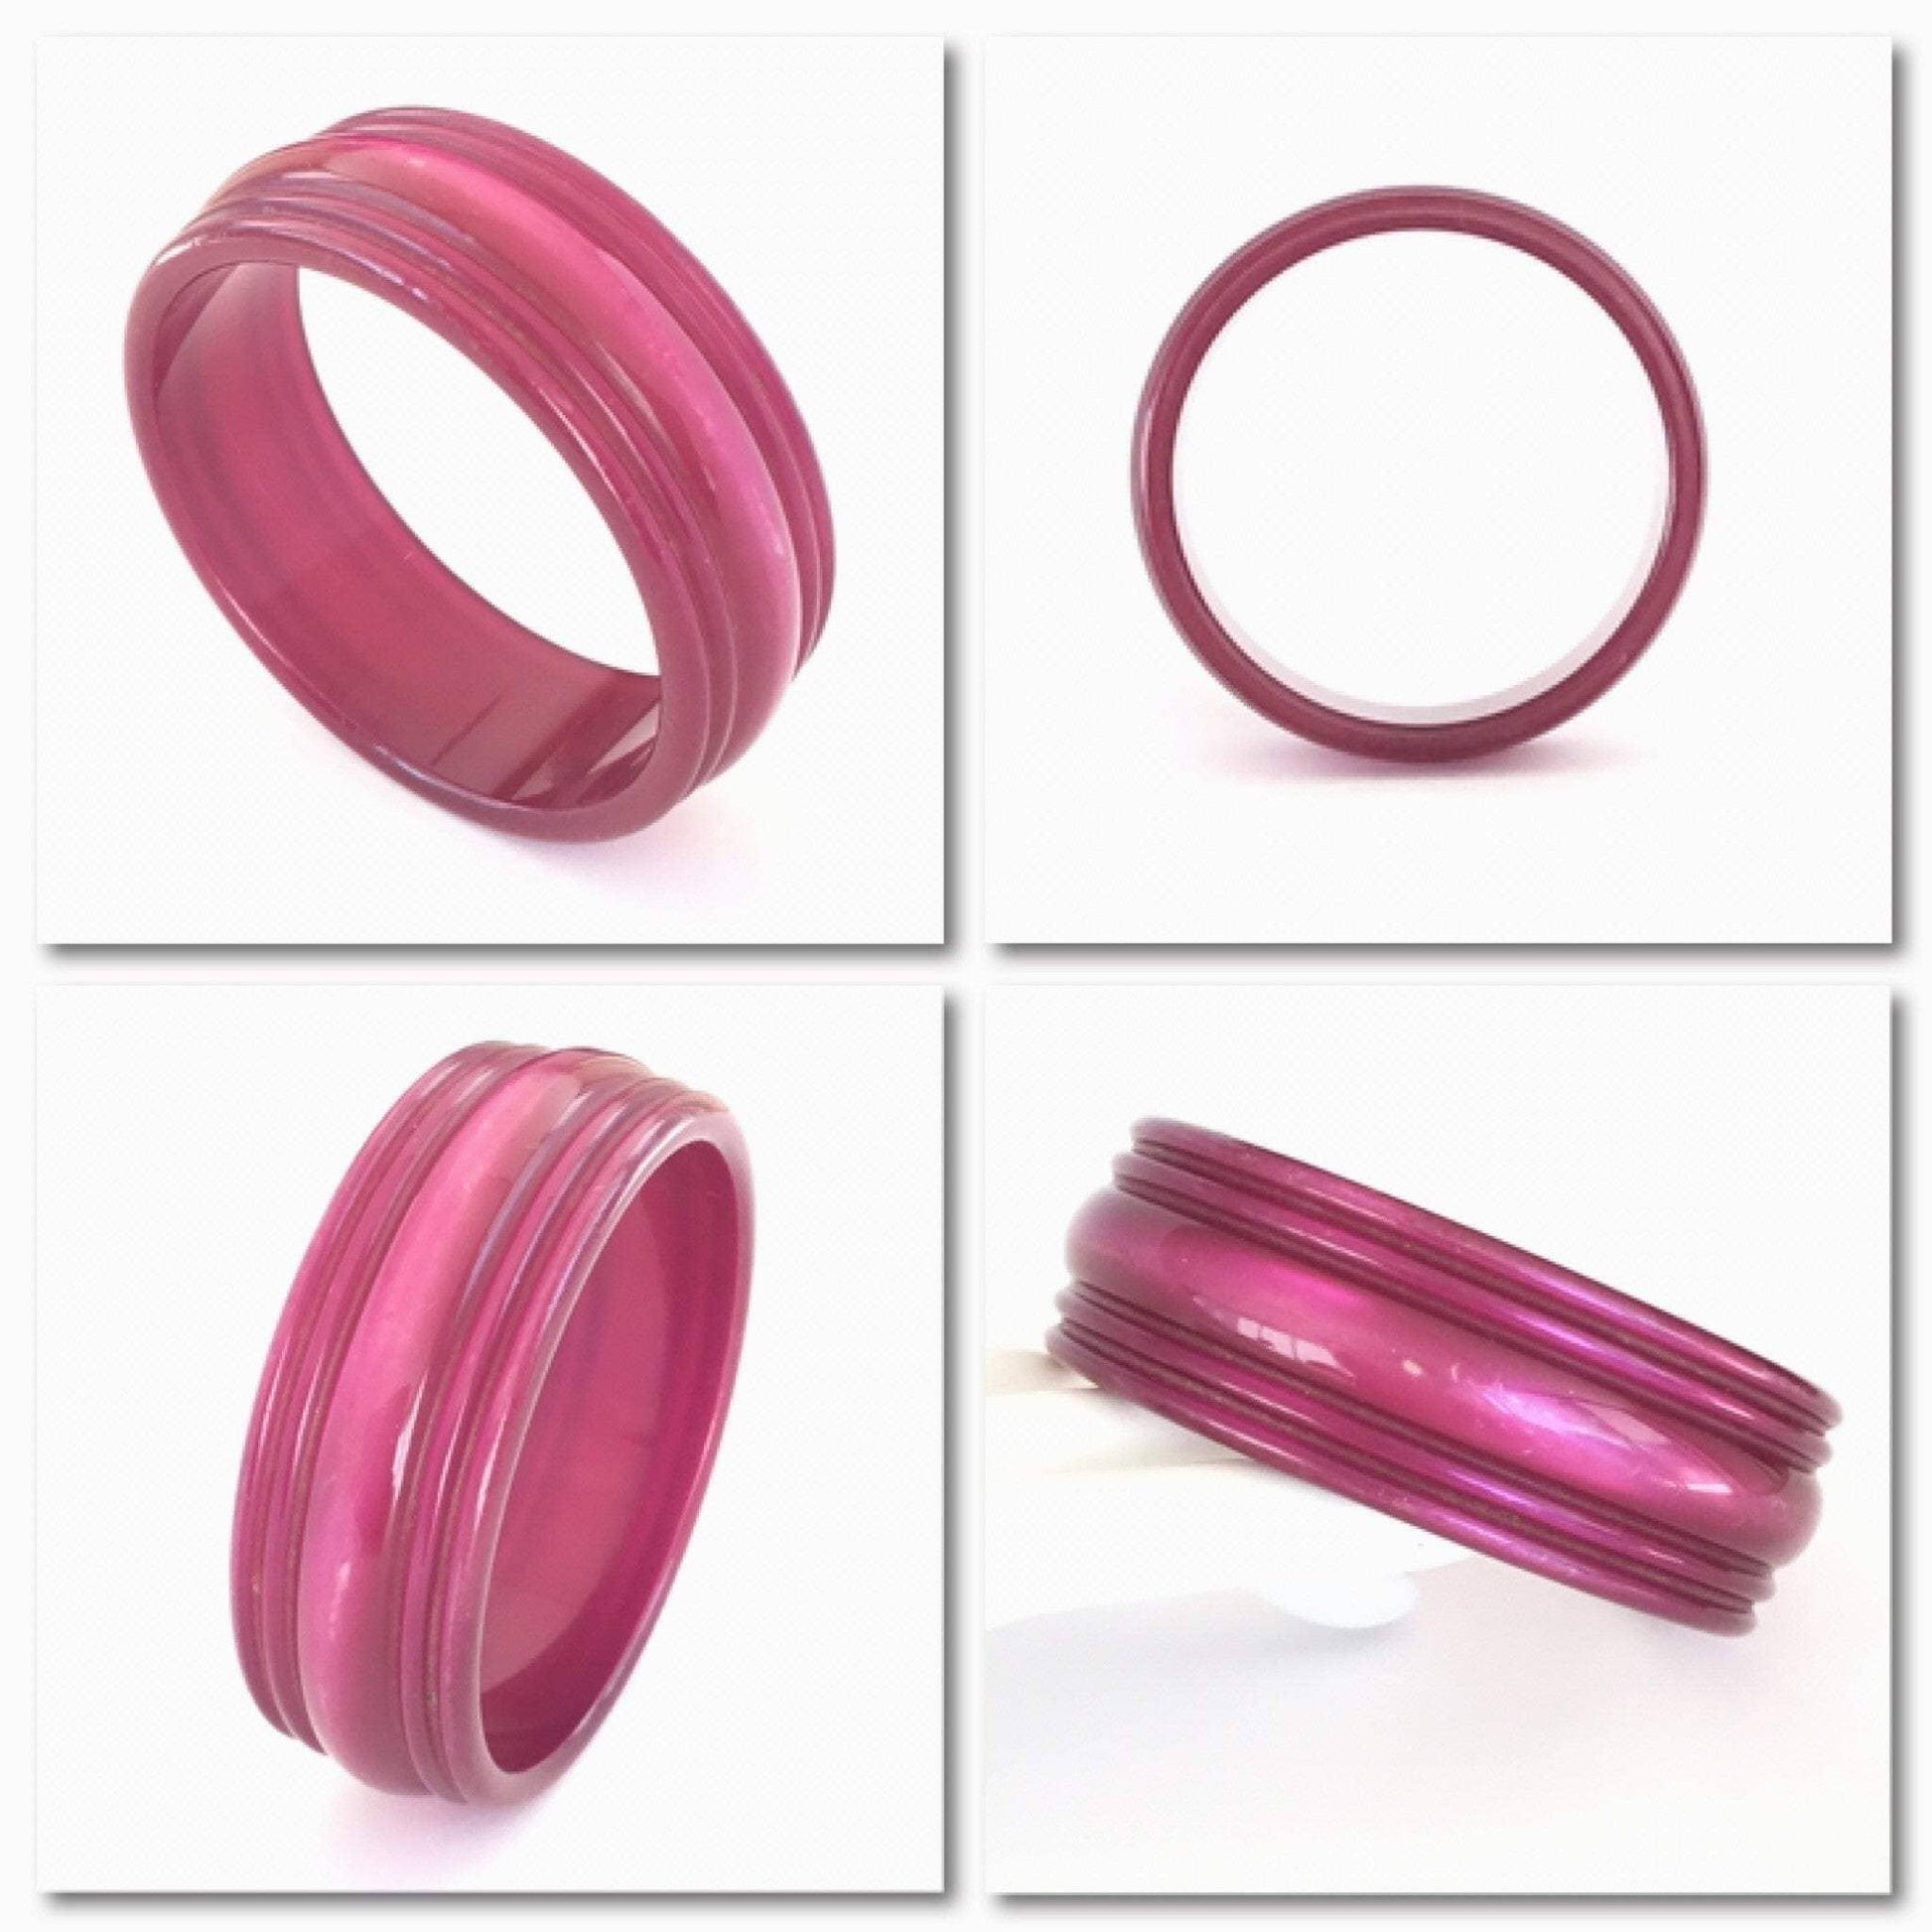 Lucite luminesque magenta vintage moonglow bangle